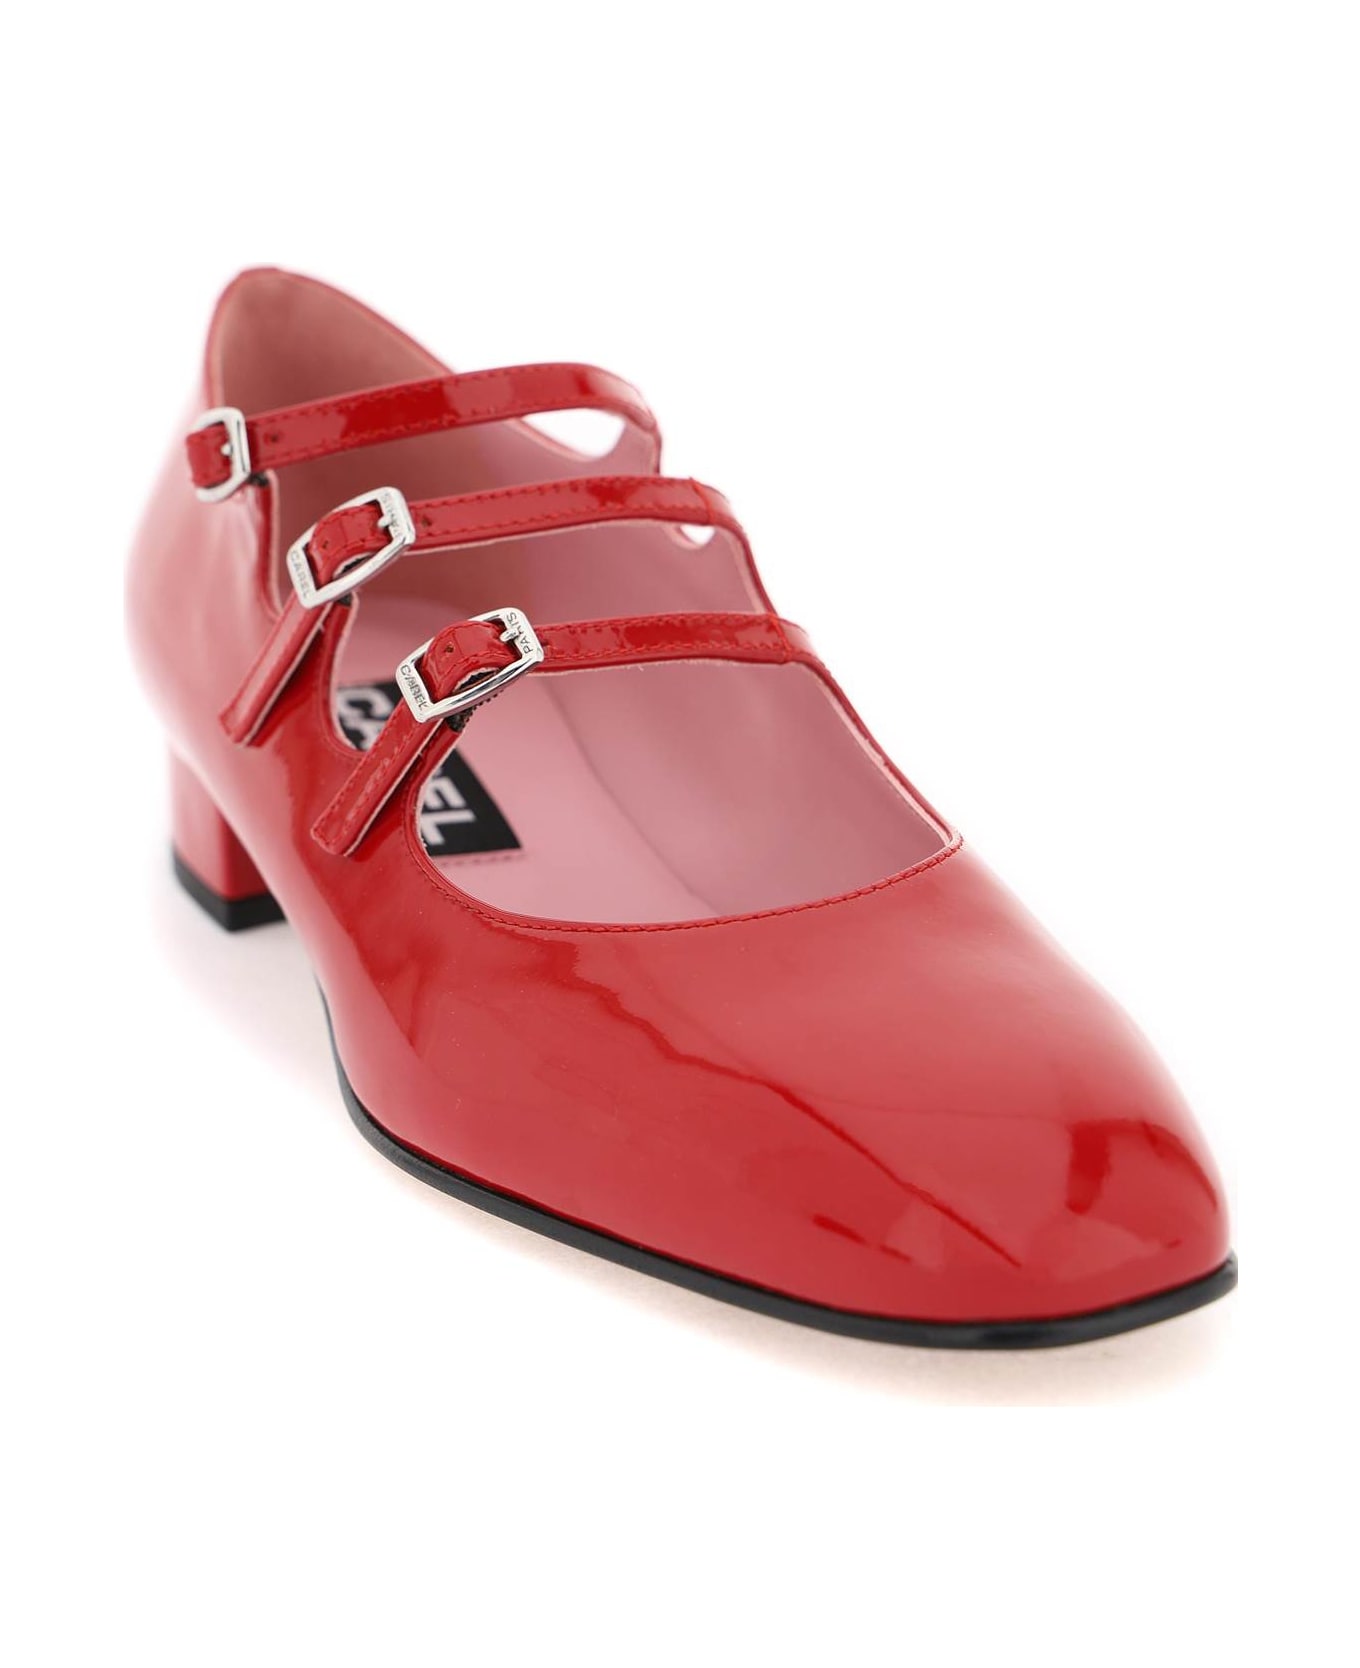 Carel Patent Leather Ariana Mary Jane - ROUGE (Red)